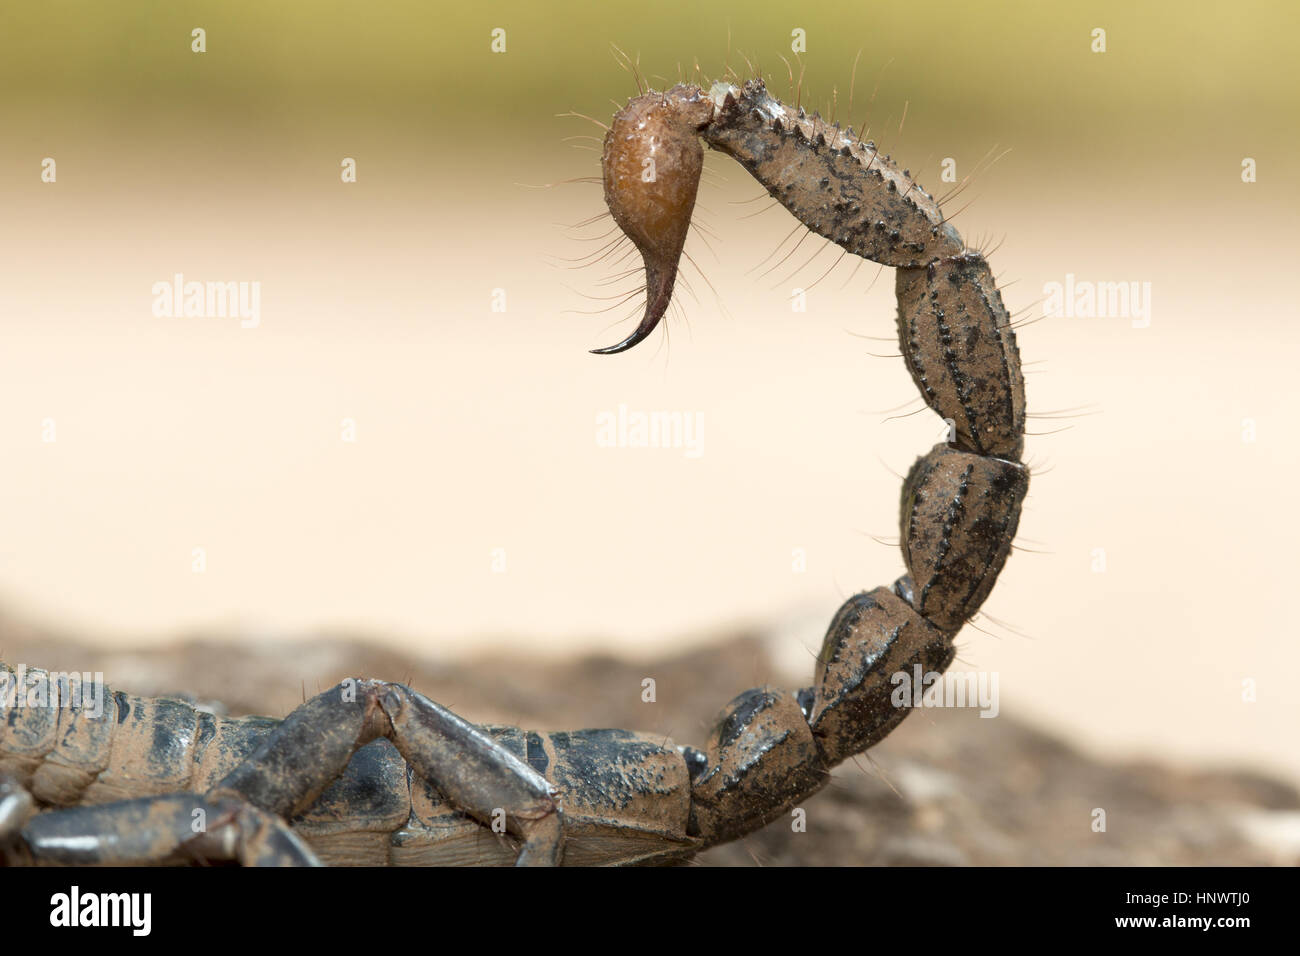 Burrowing scorpion, Heterometrus sp., Barnawapara WLS, Chhattisgarh. Large scorpion with massive pincers. Male has markedly larger pincers than the fe Stock Photo